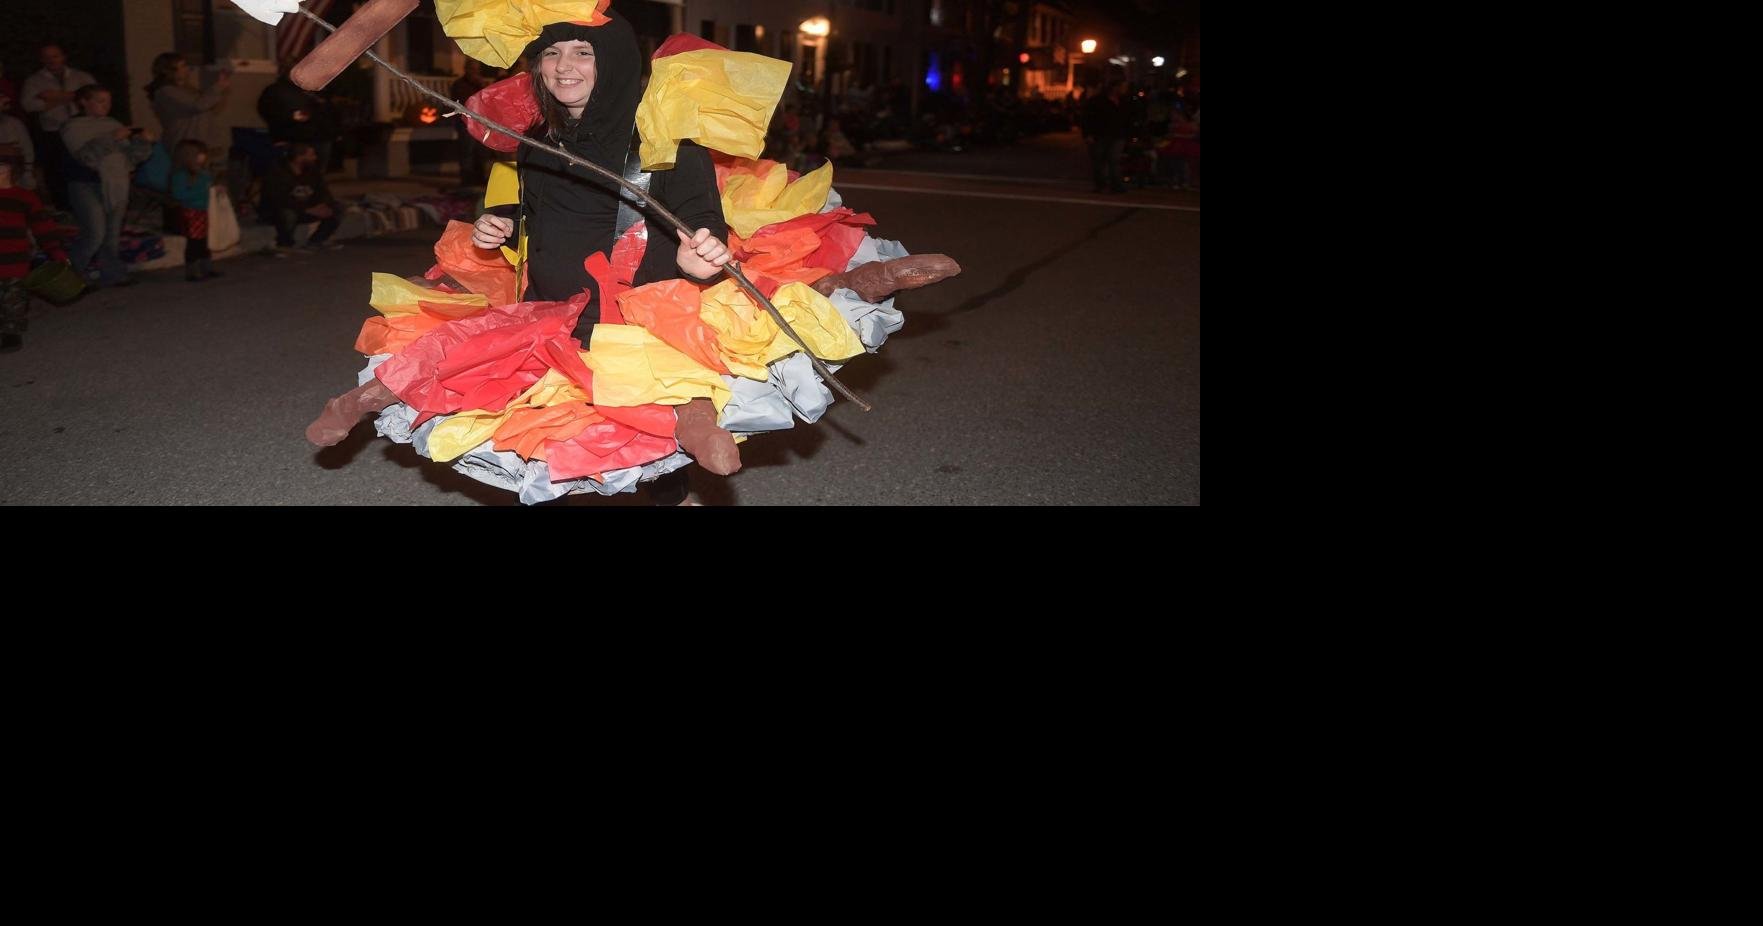 Newville Halloween Parade winners announced